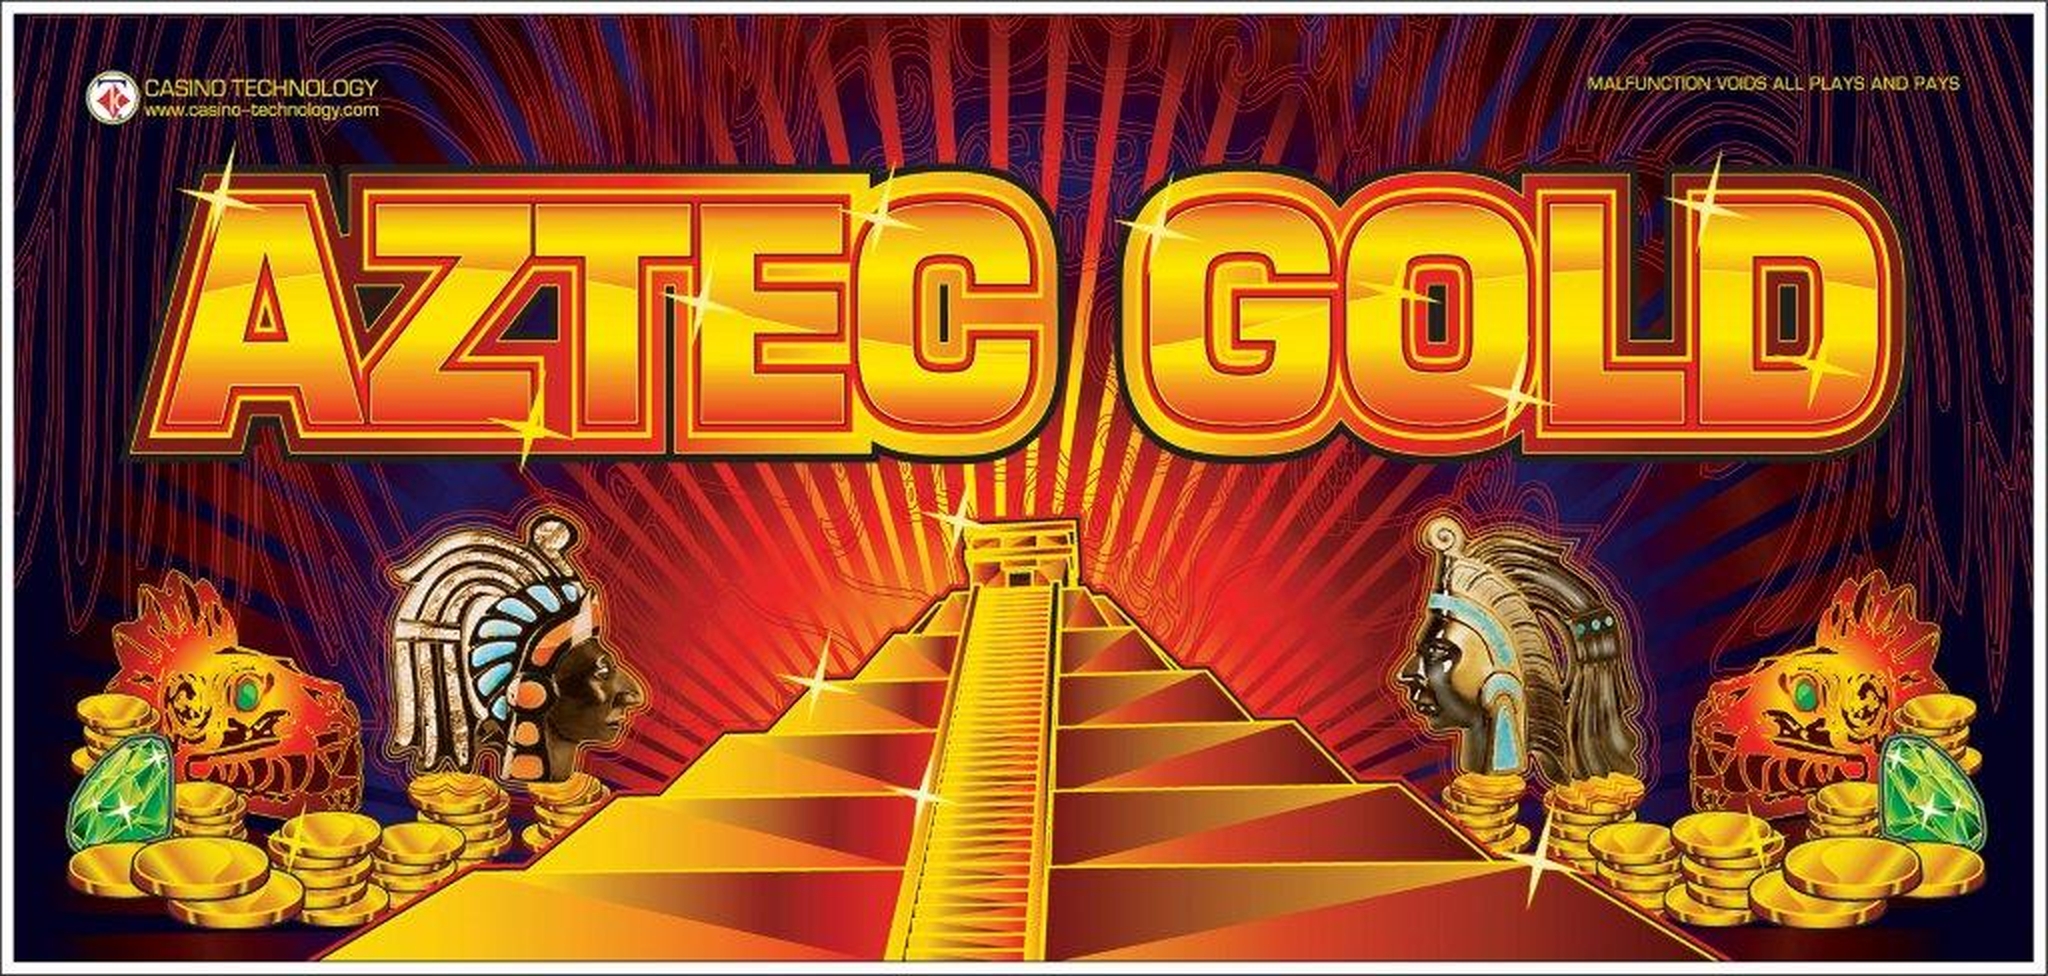 The Aztec Gold Online Slot Demo Game by casino technology